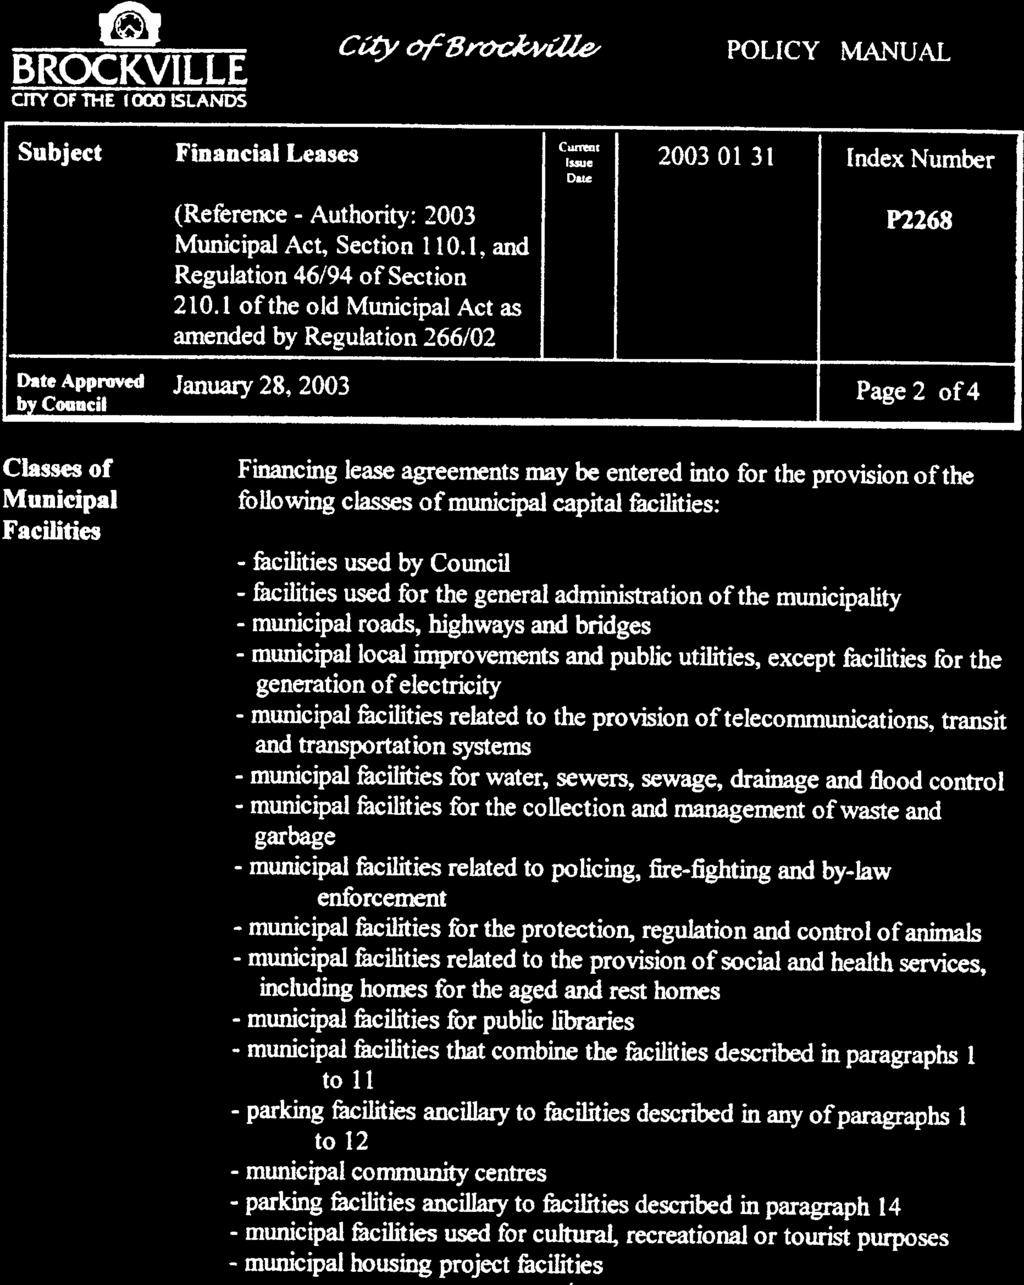 . BROCKVILLE CITY OF ThE 1000 ISLANDS POLICY MANUAL Subject Financial Leases 2003 01 31 Index Number (Reference - Municipal Act, Section Authority: Date 2003 P2268 Regulation 46/94 of Section 10.